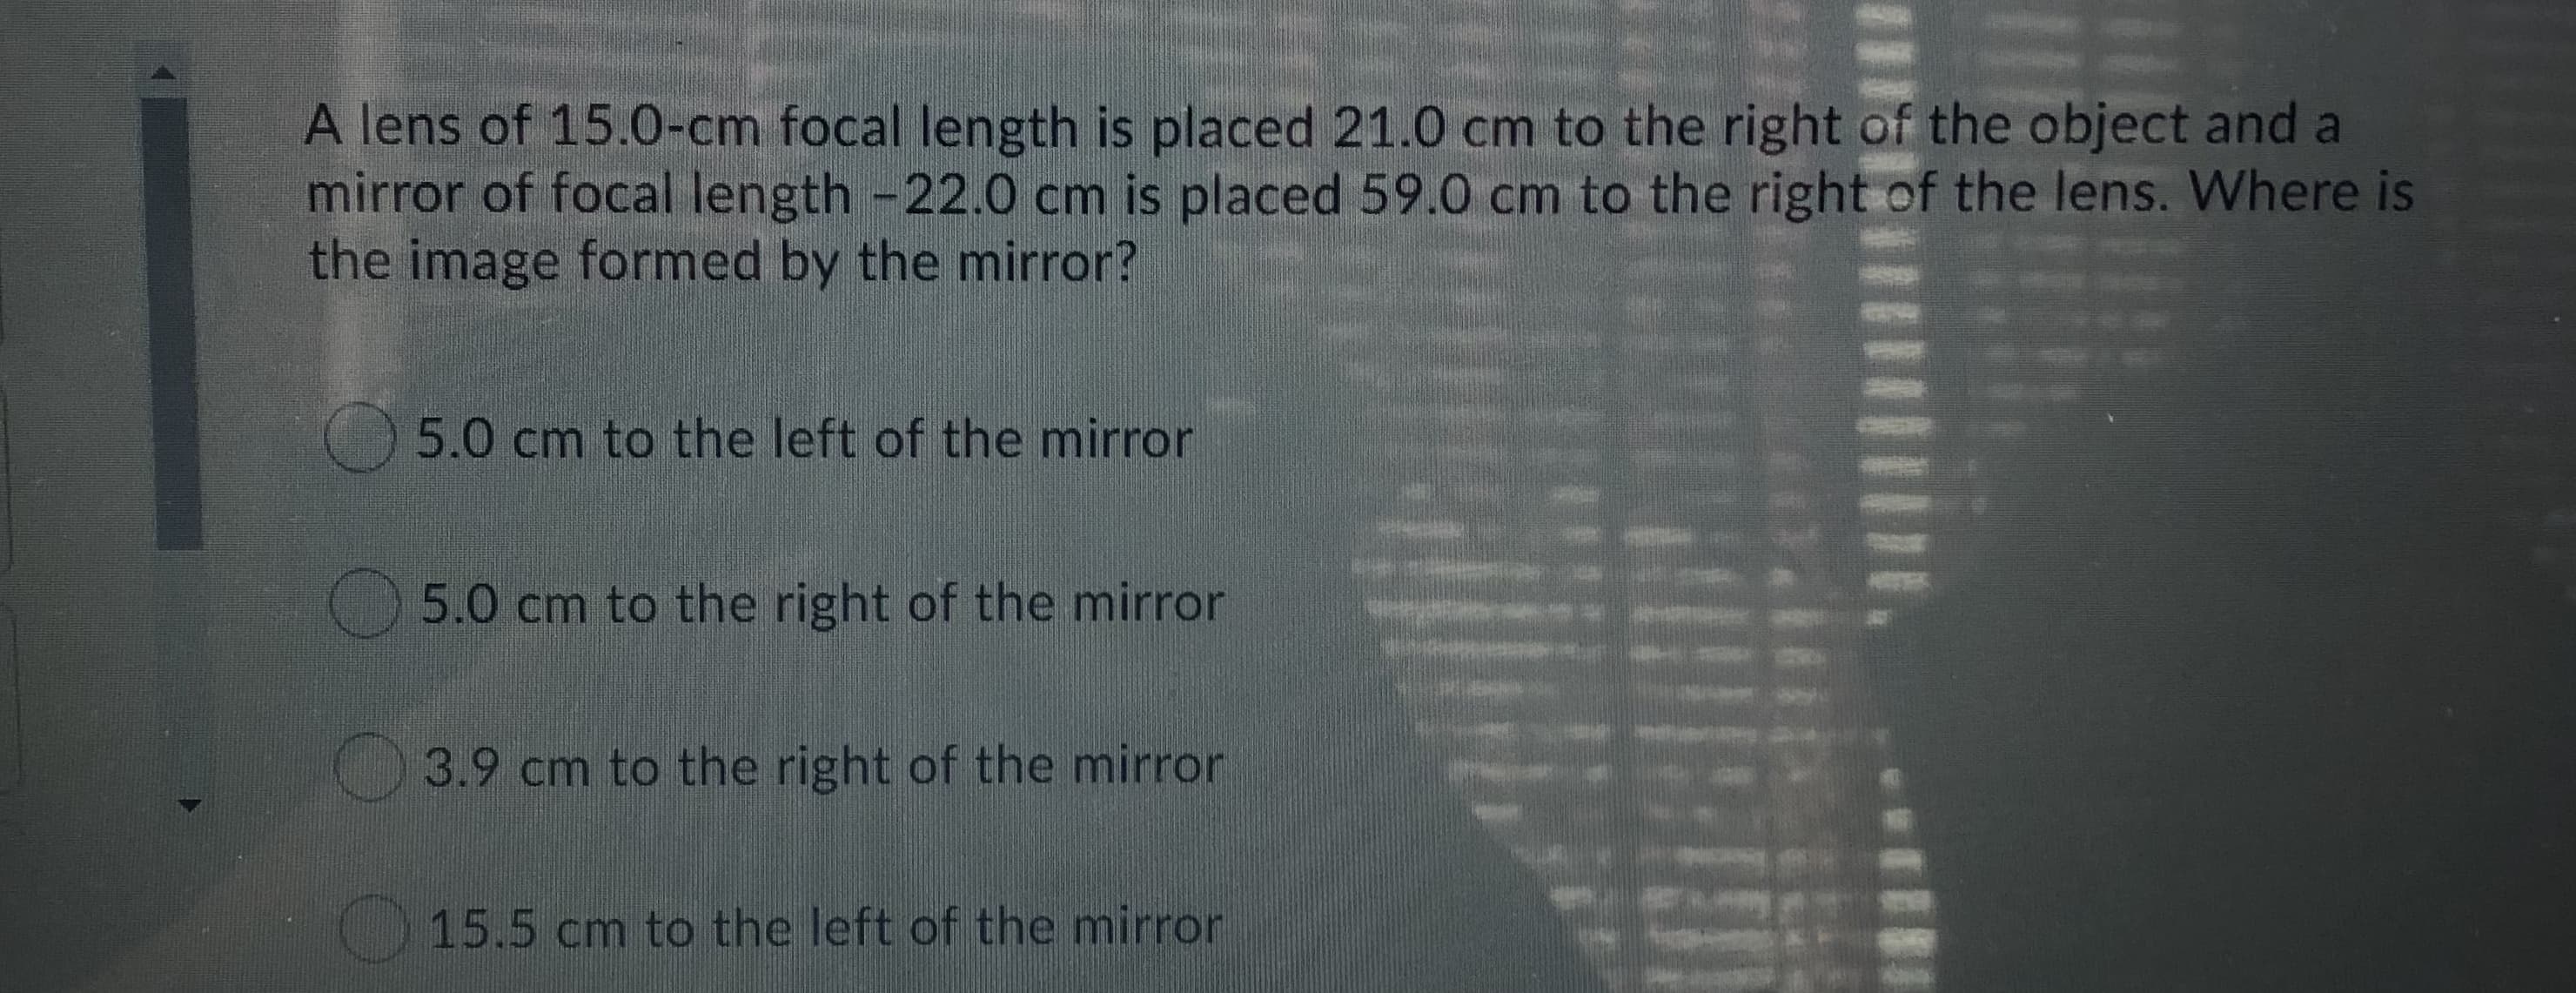 A lens of 15.0-cm focal length is placed 21.0 cm to the right of the object and a
mirror of focal length -22.0 cm is placed 59.0 cm to the right of the lens. Where is
the image formed by the mirror?
